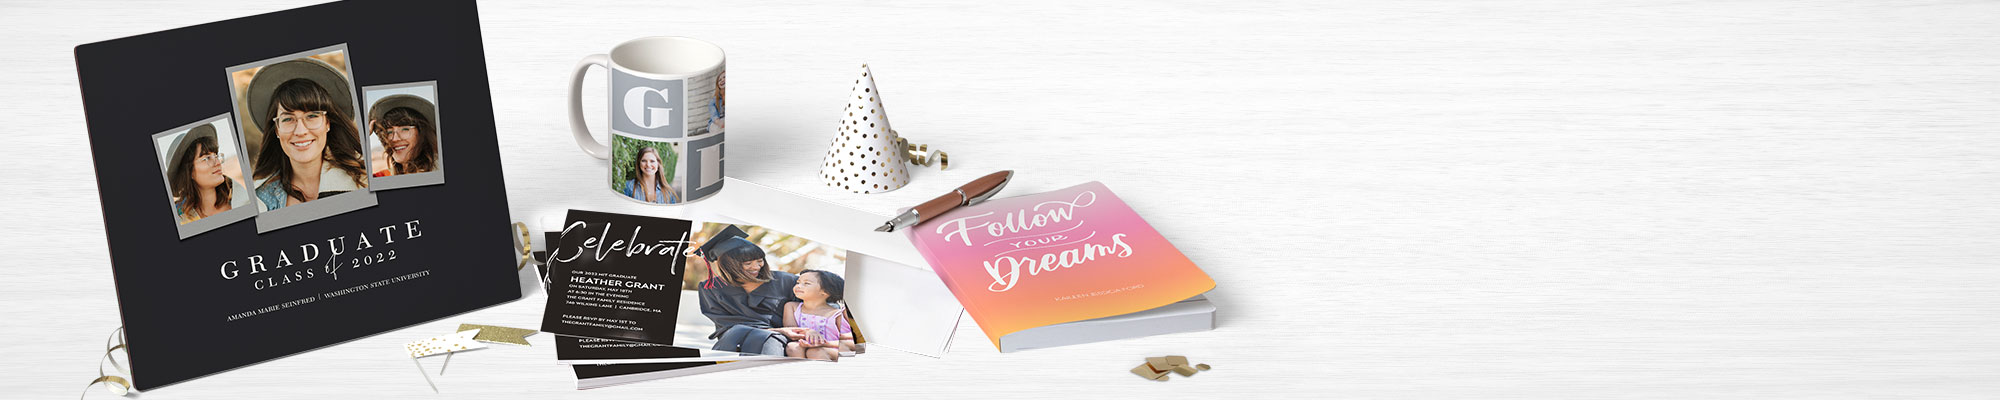 Graduation Cards + Gifts